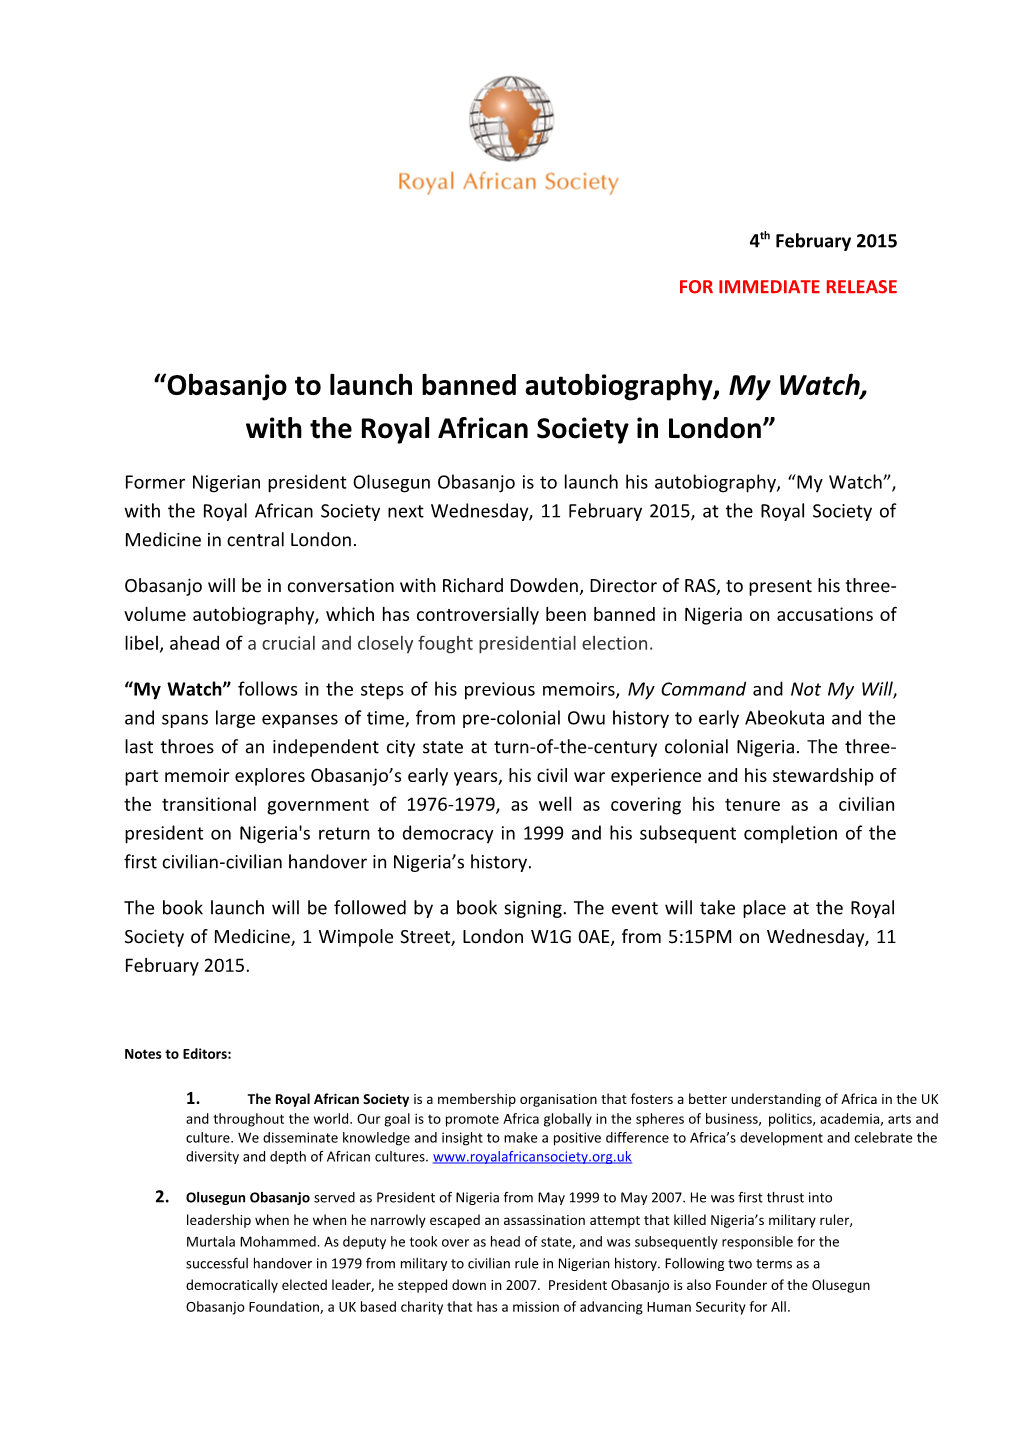 Obasanjo to Launch Banned Autobiography,My Watch, with the Royal African Society in London